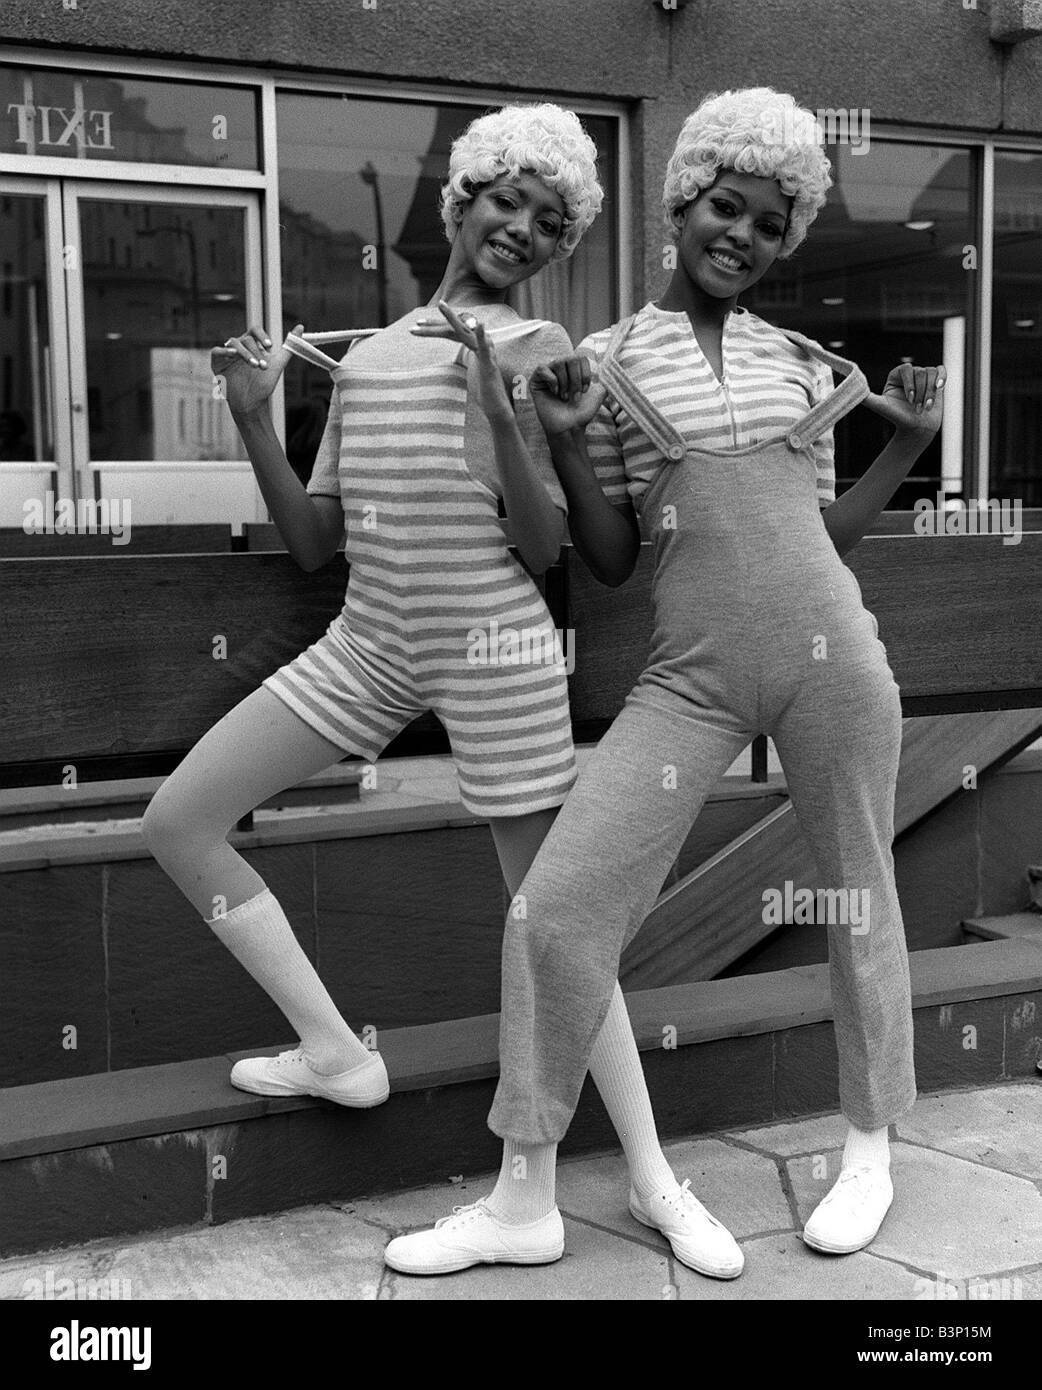 Two knitted outfits by Marlborough Hazel left in biband brace culotte outfit and Kubi in dungaree outfit African Caribbean models with blond hair posing together Stock Photo